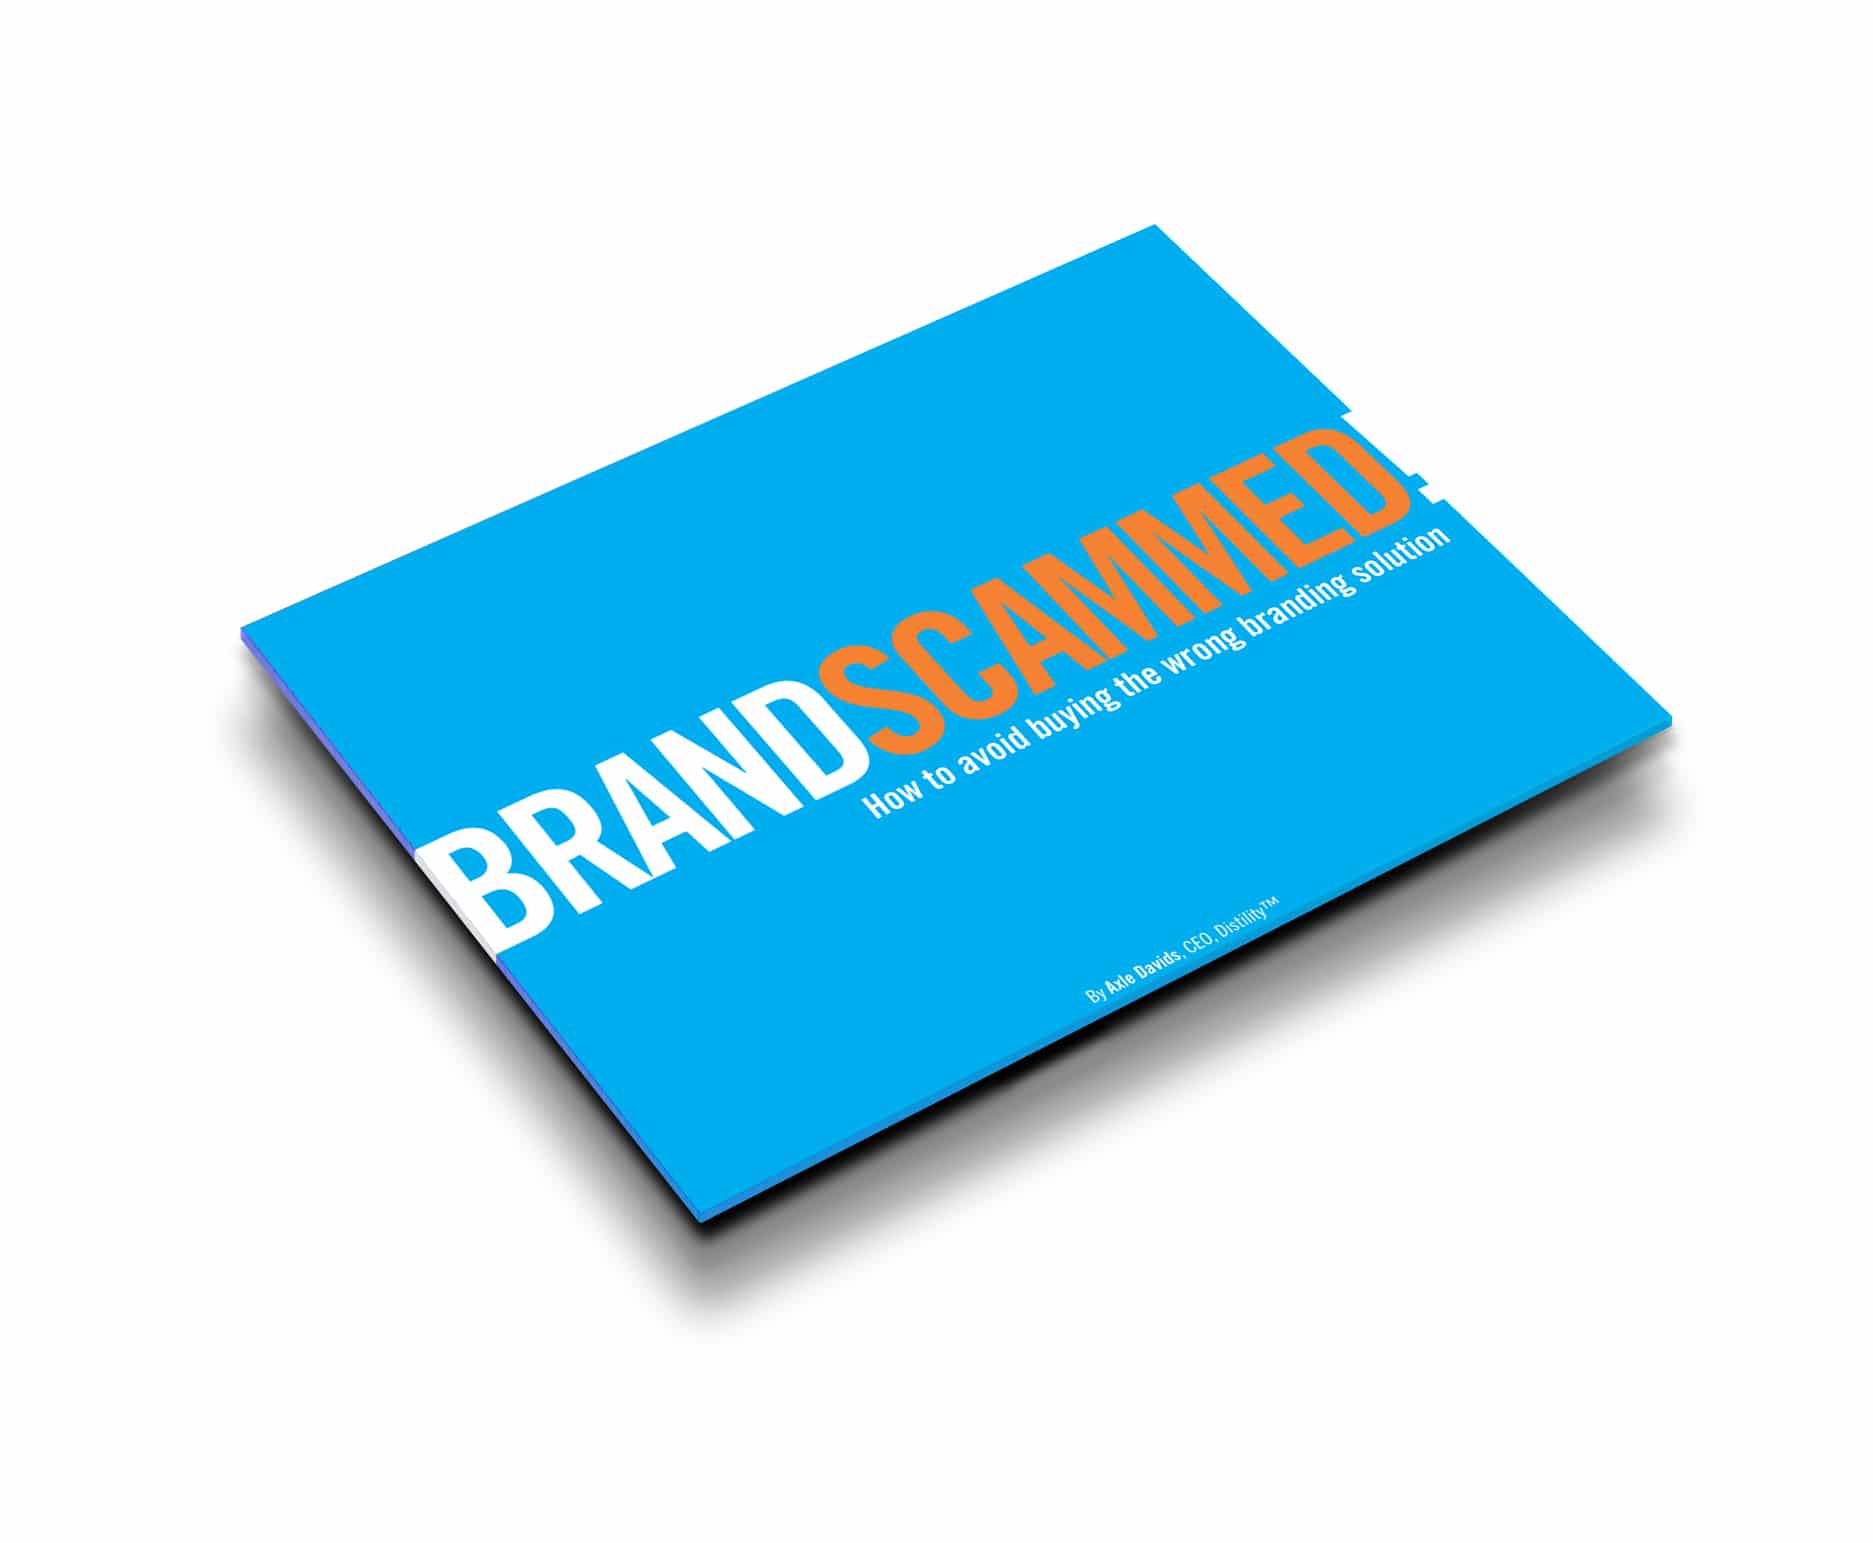 Brand Strategy Agencies Exposed: Our How to Buy Branding eBook